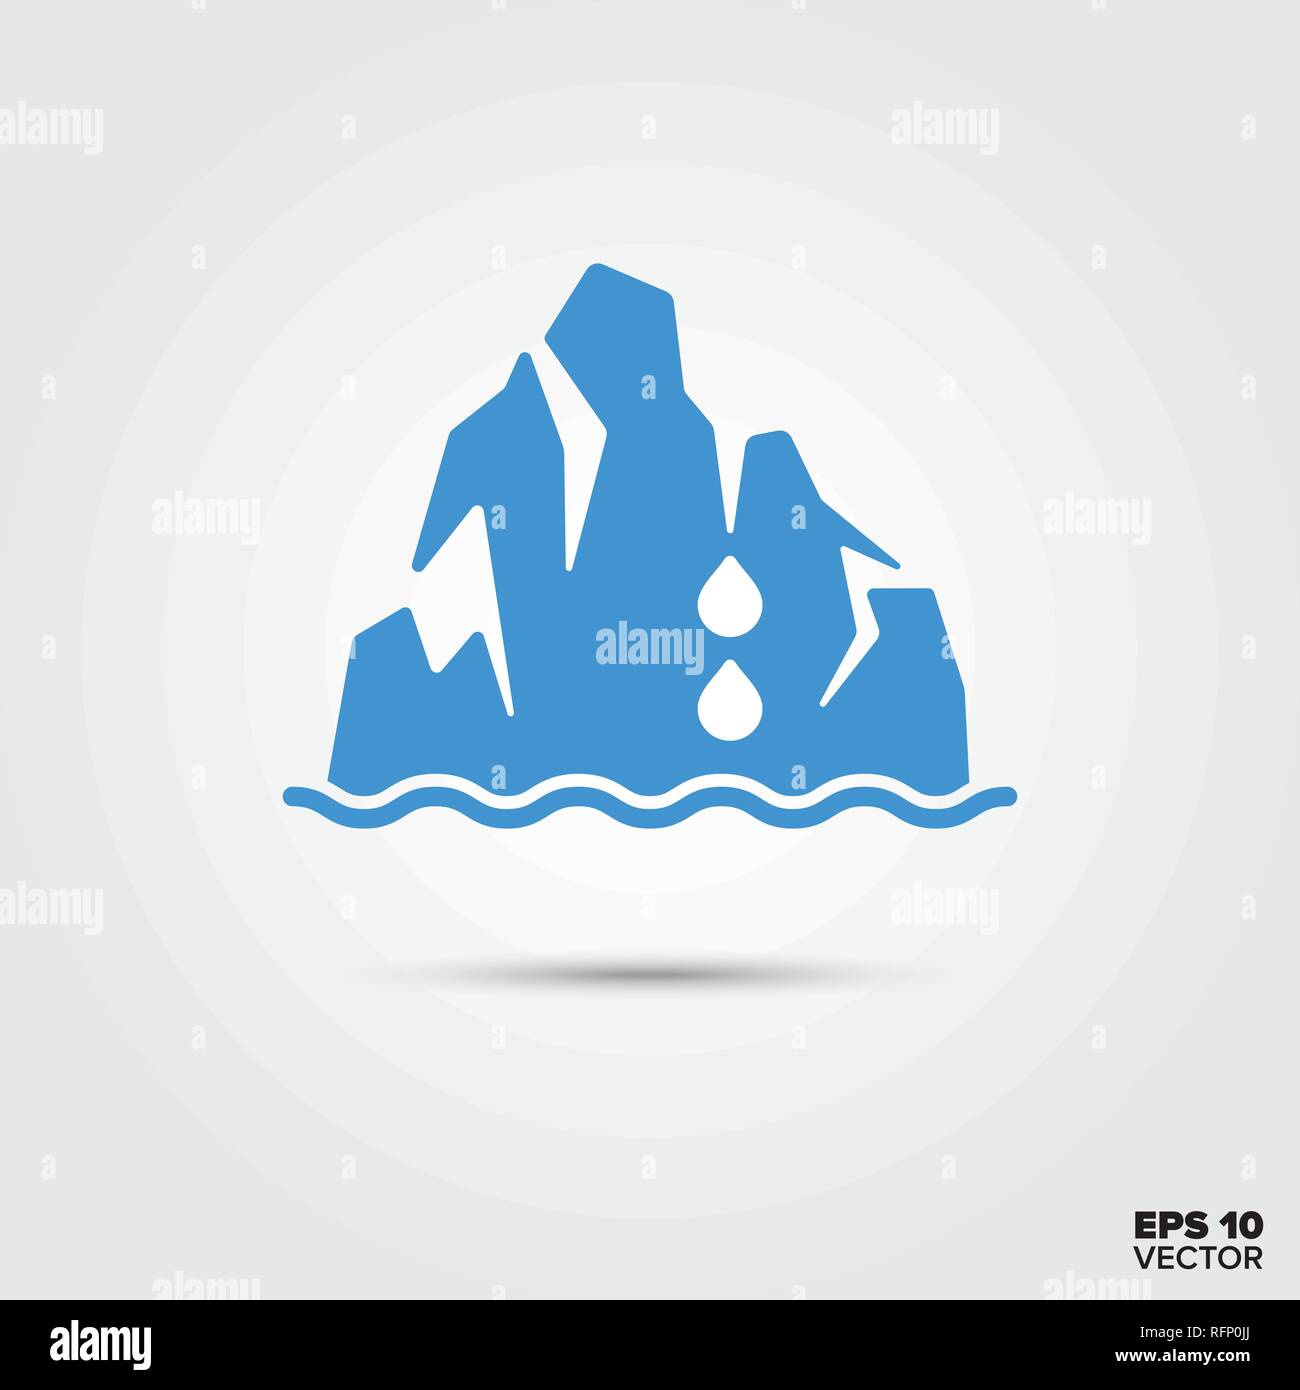 Melting iceberg icon, global warming and climate change symbol. EPS 10 Vector. Stock Vector